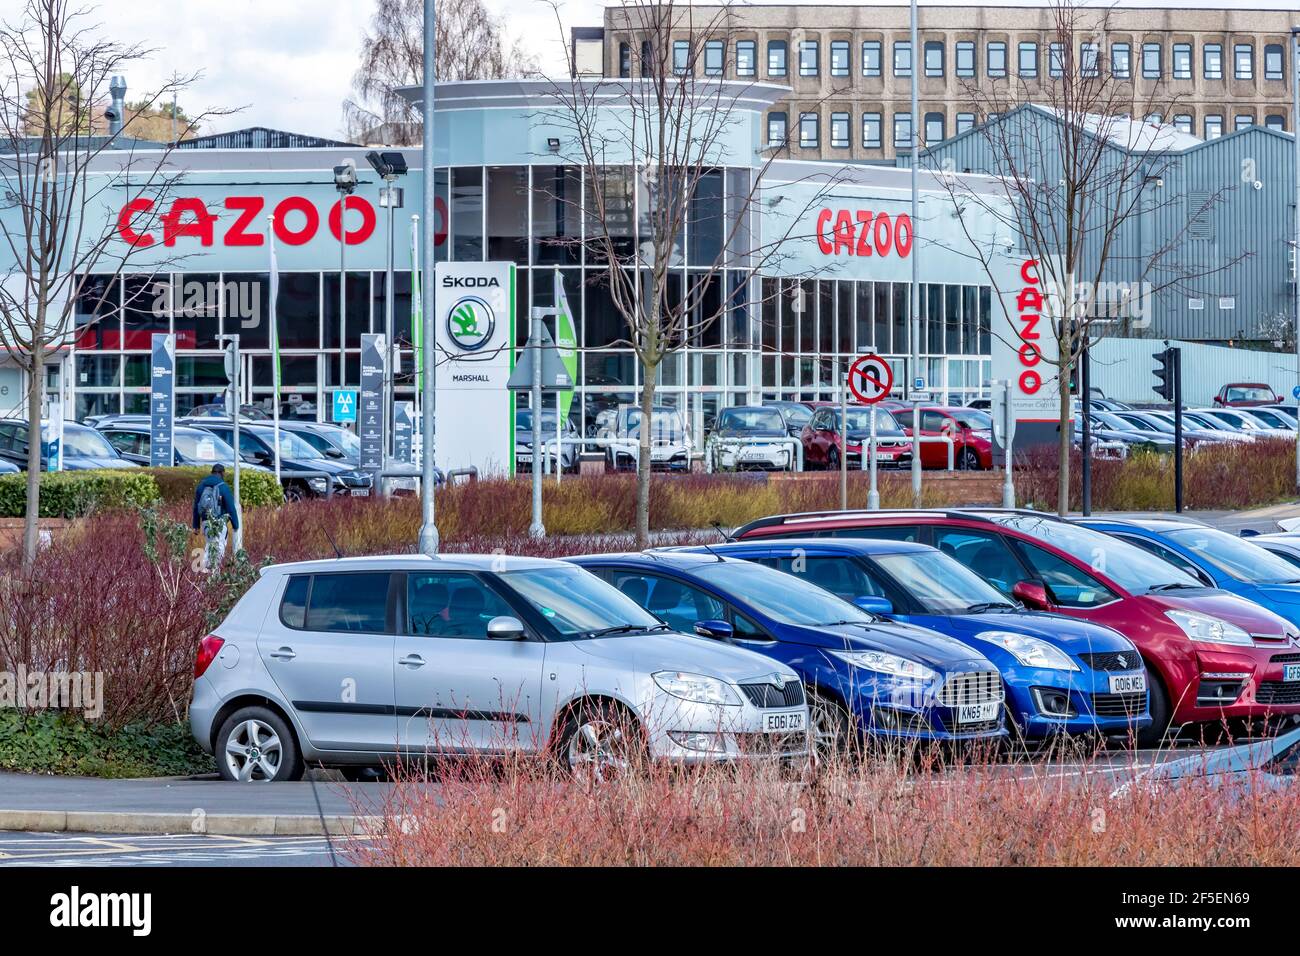 Cazoo car sales show rooms on the with cars in a public carpark on a bright warm sunny afternoon, Northampton, Stock Photo